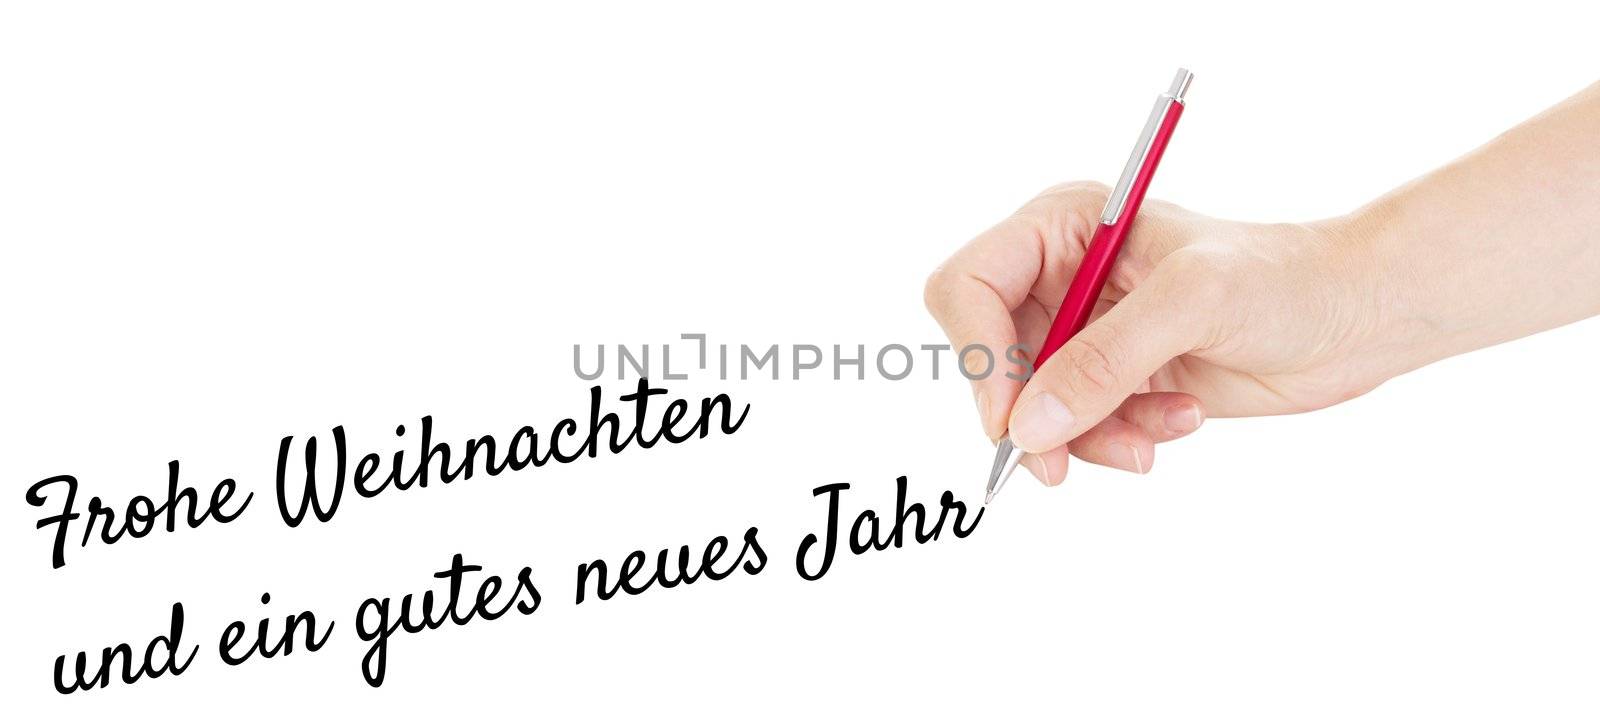 Hand with pen isolated on white background